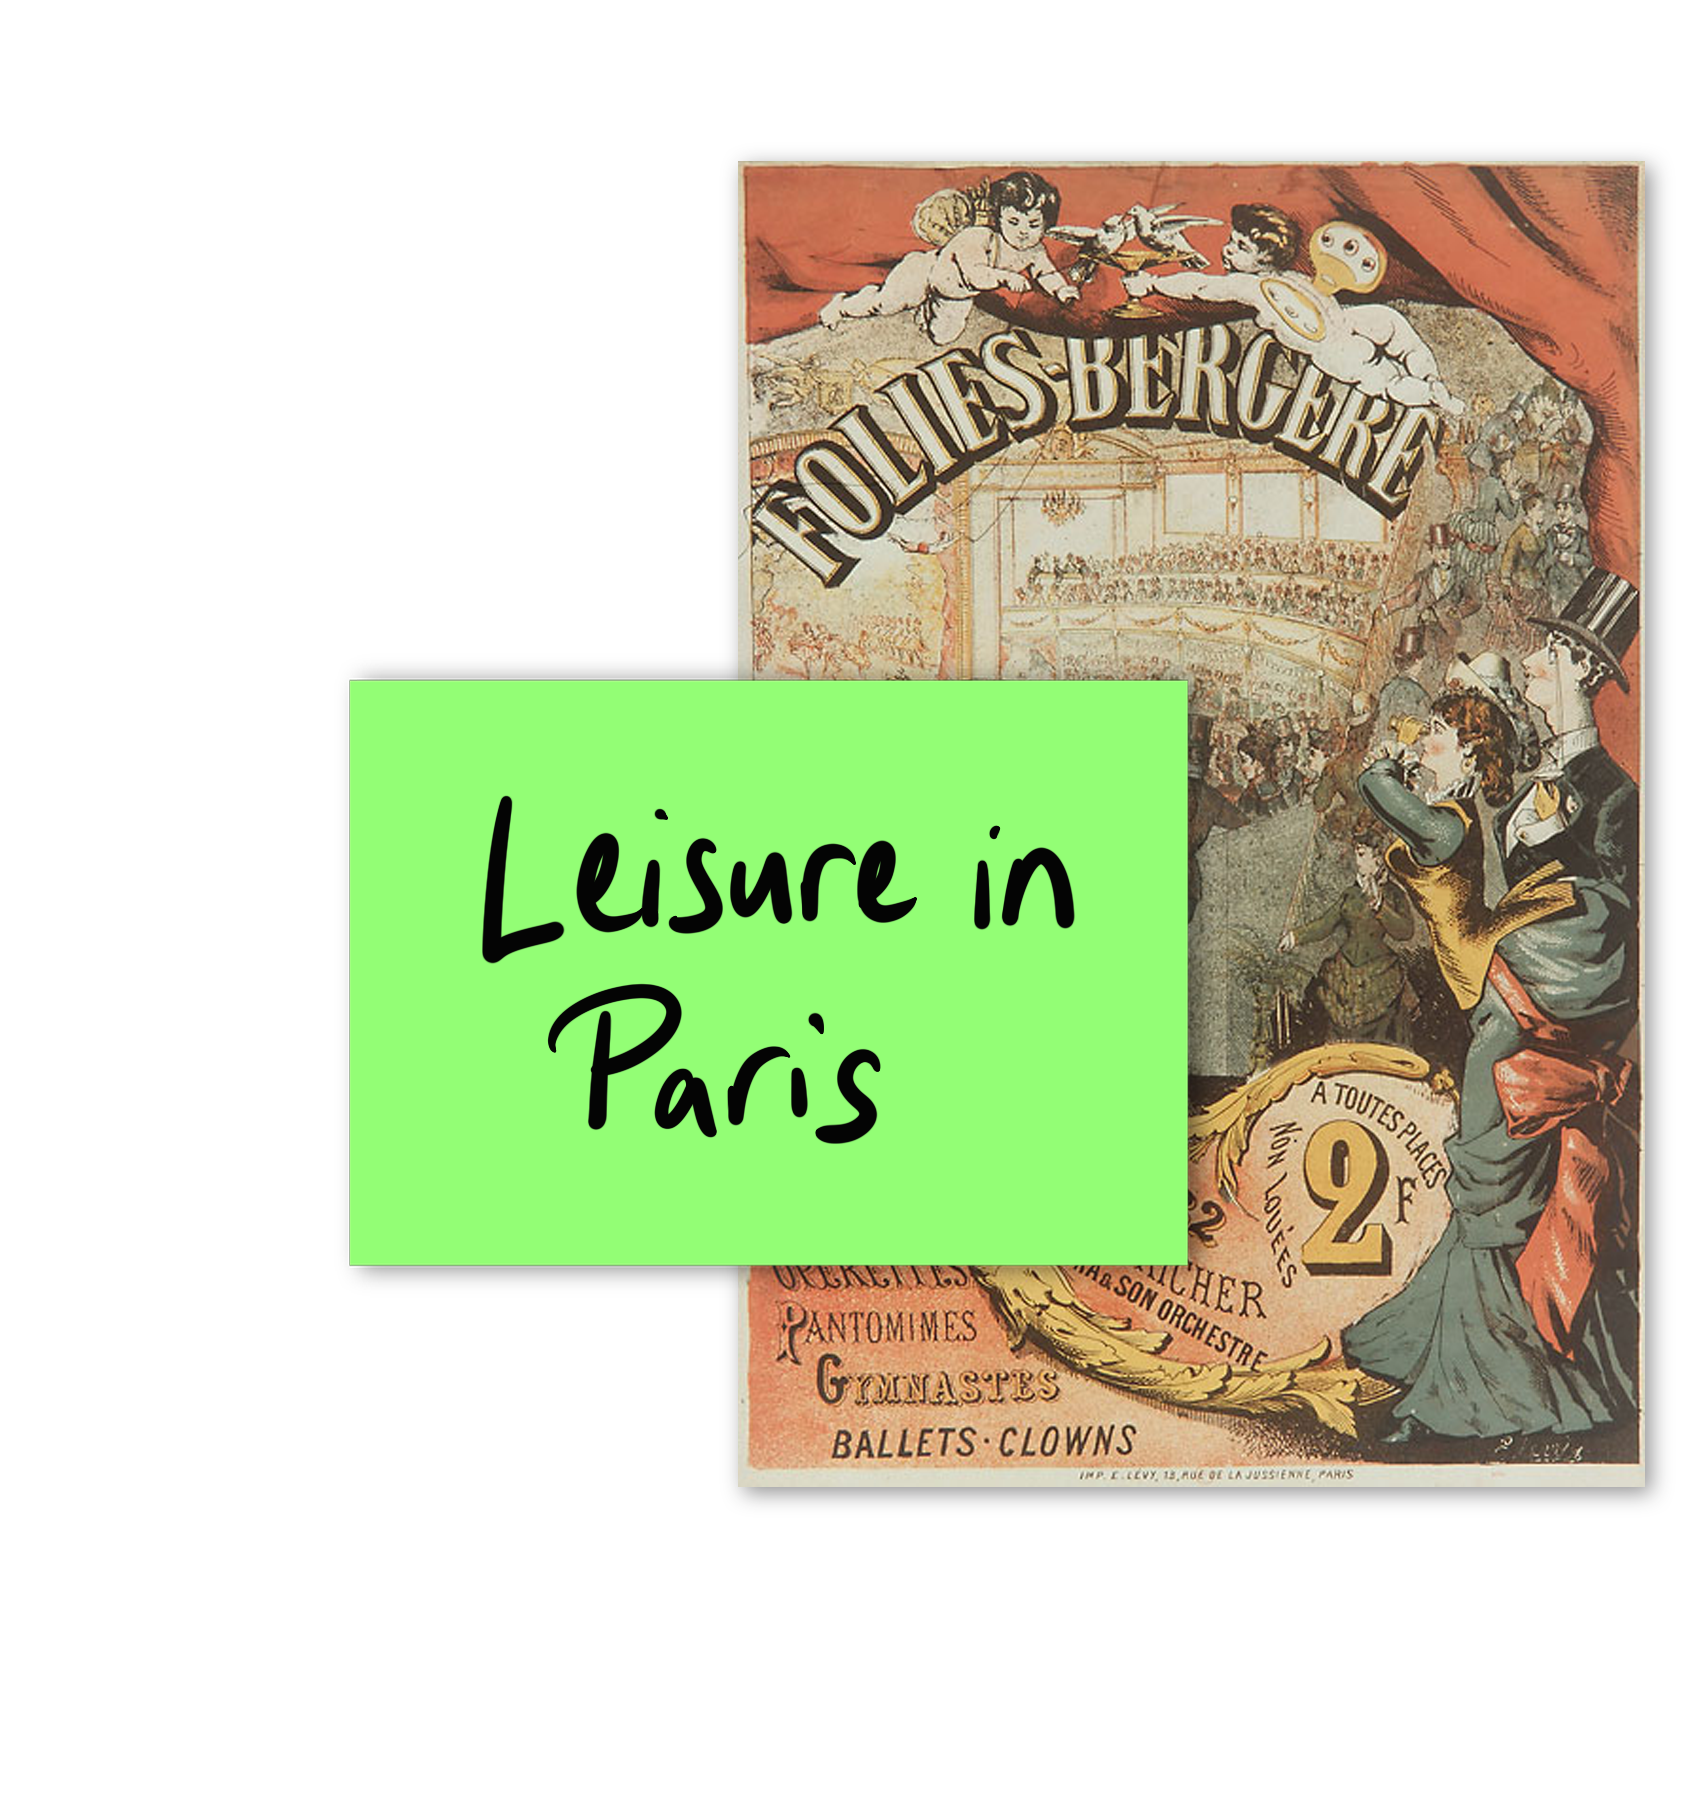 leisure in paris button with image of poster for the folies begere